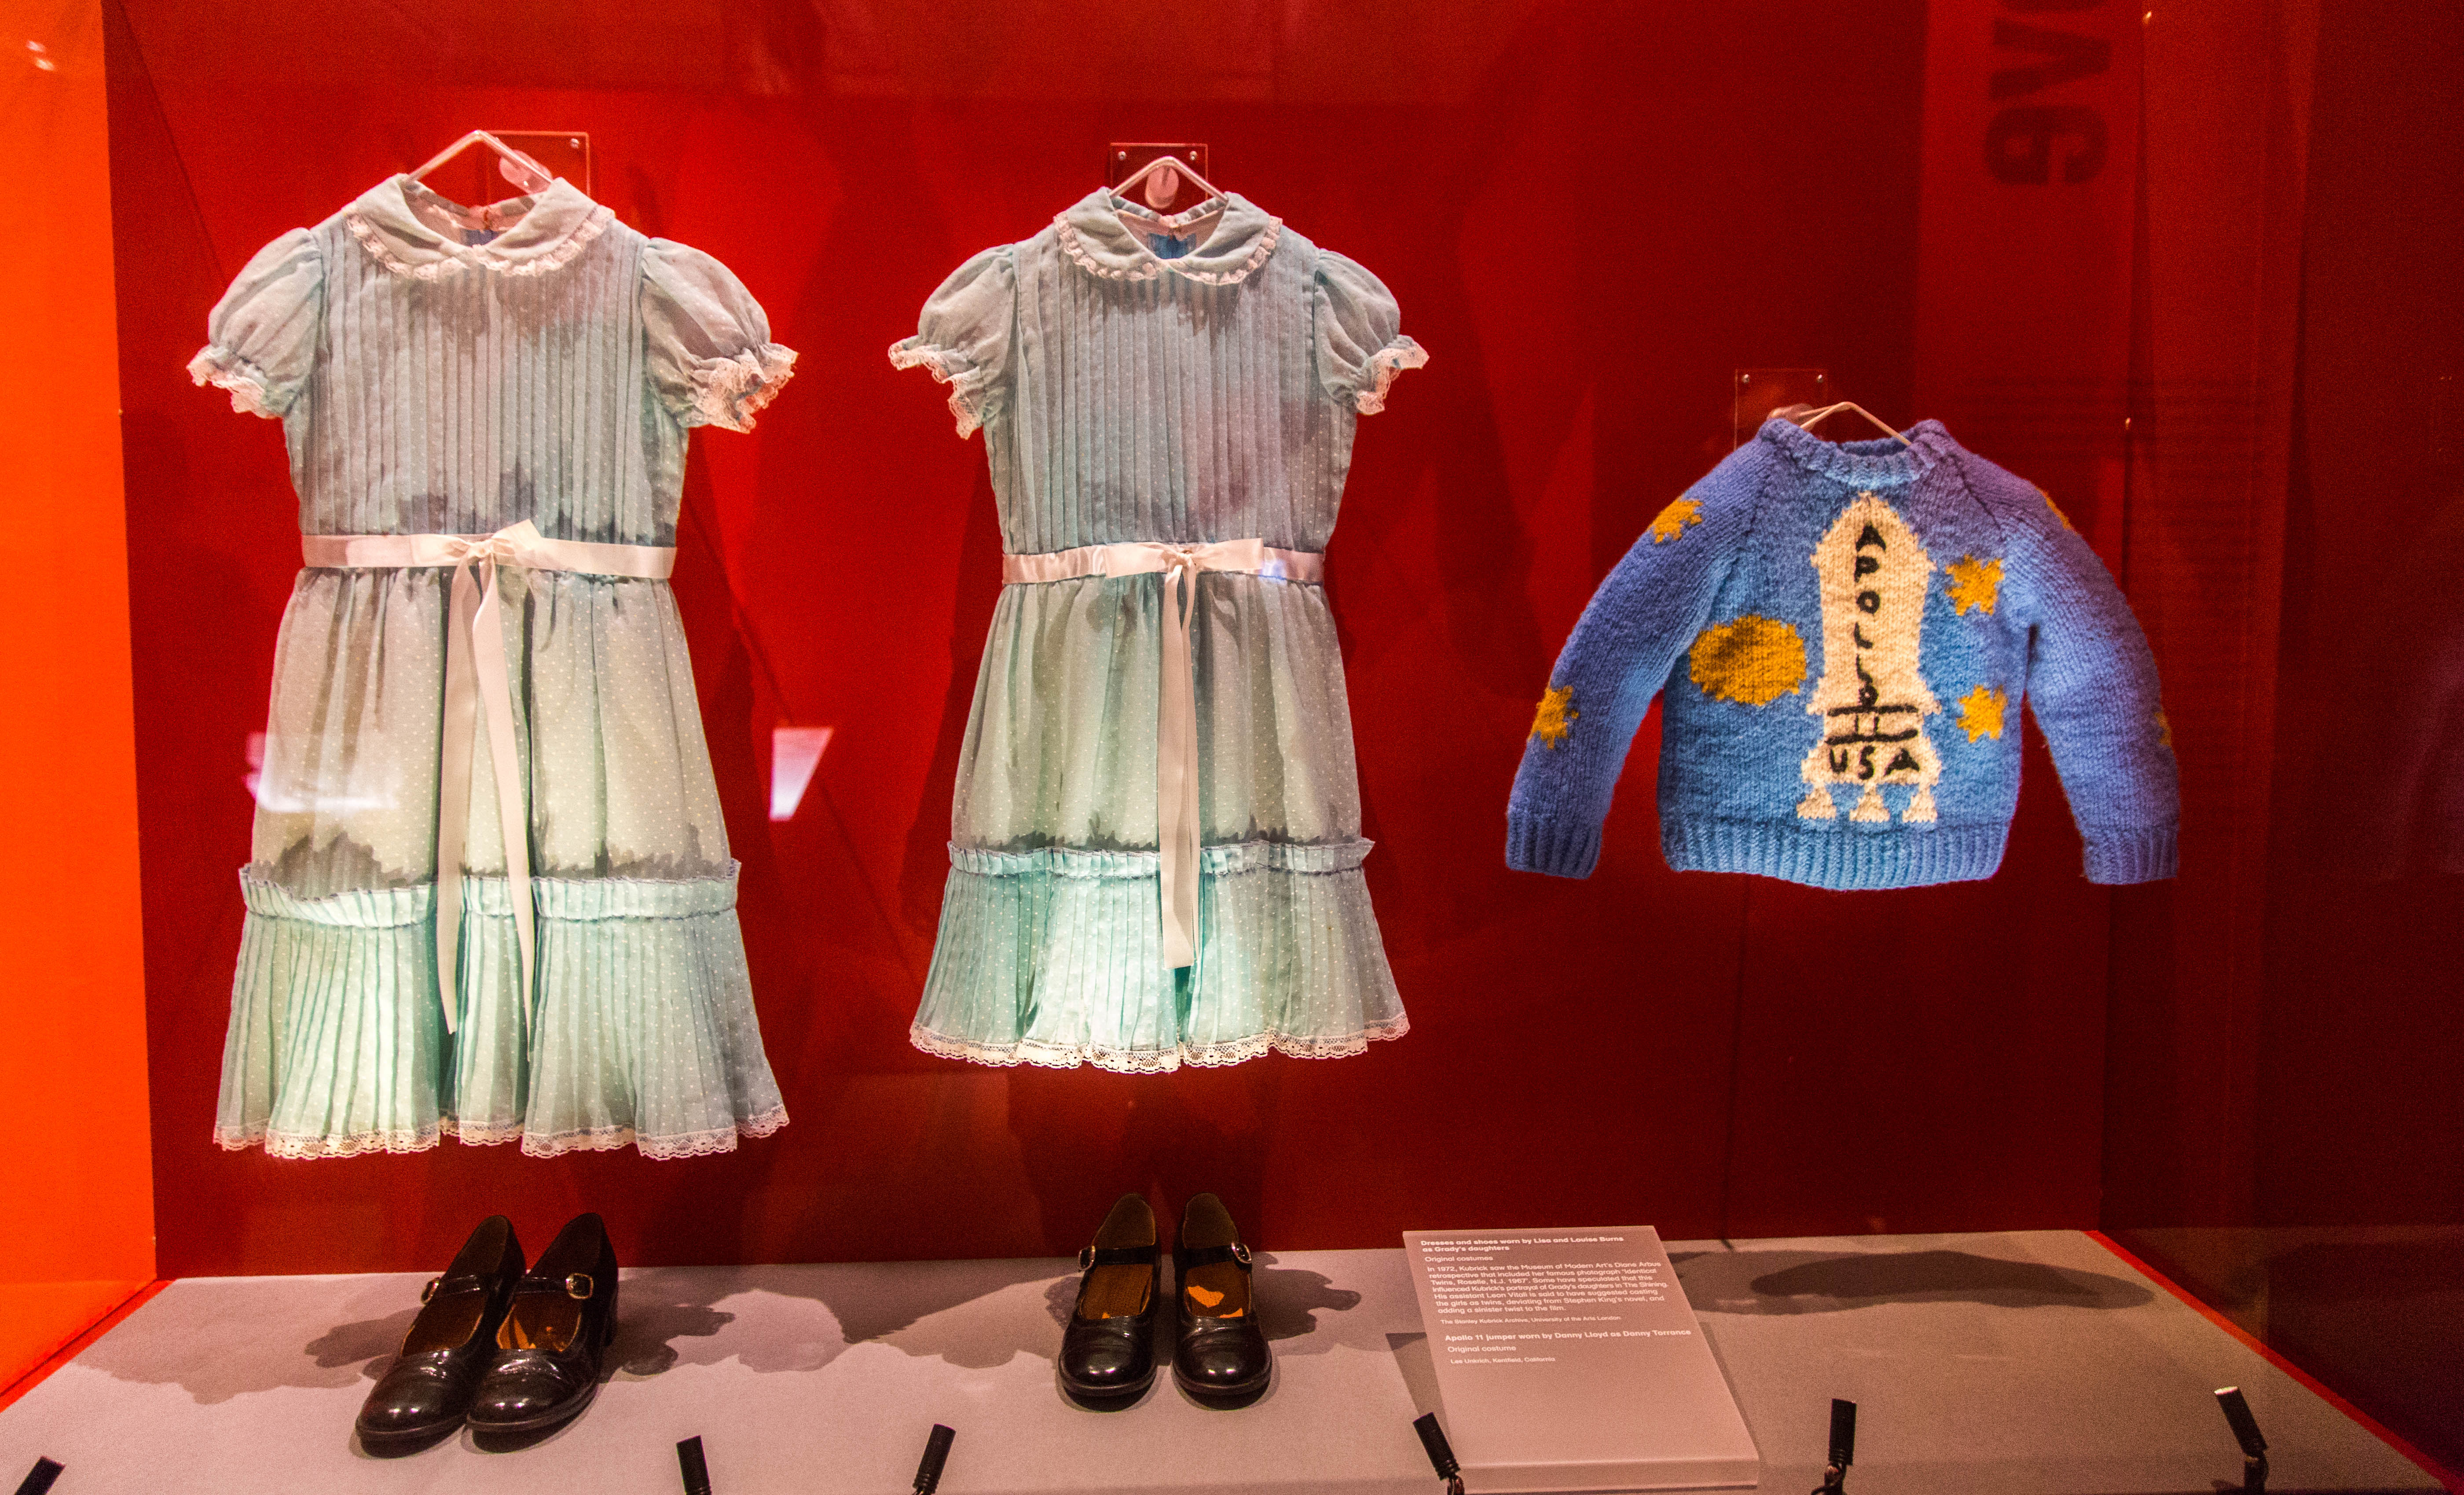 LONDON, ENGLAND - MAY 2019: Original costume props from the adaptation of The Shining, starring Jack Nicholson and Directed by Stanley Kubrick. On display along with other pieces at the Design Museum. - Image Hethers/Shutterstock